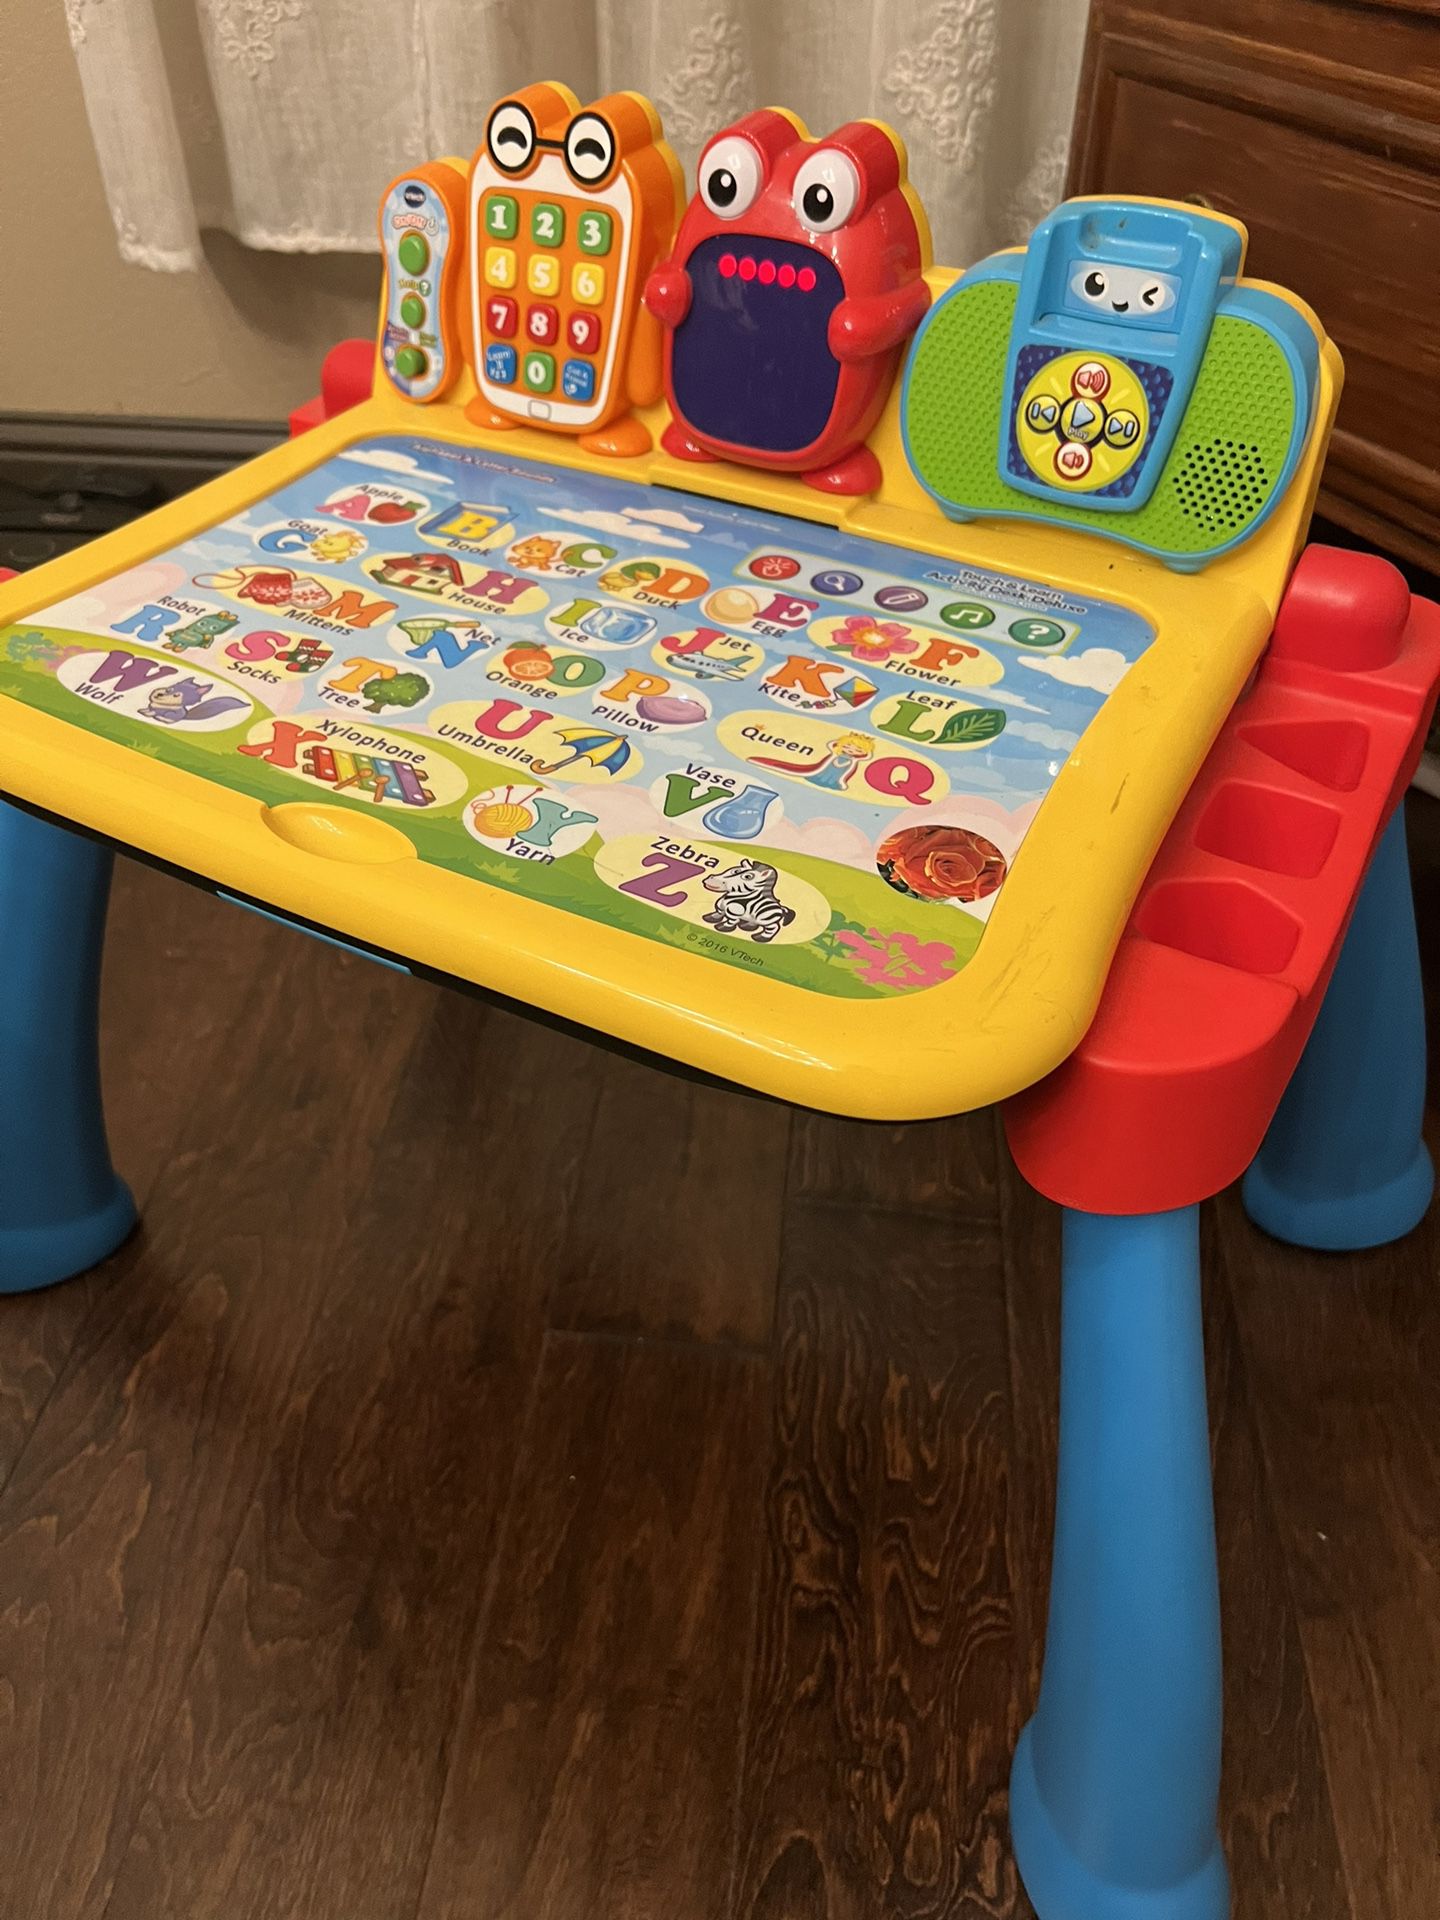 Vtech touch and learn activity desk deluxe